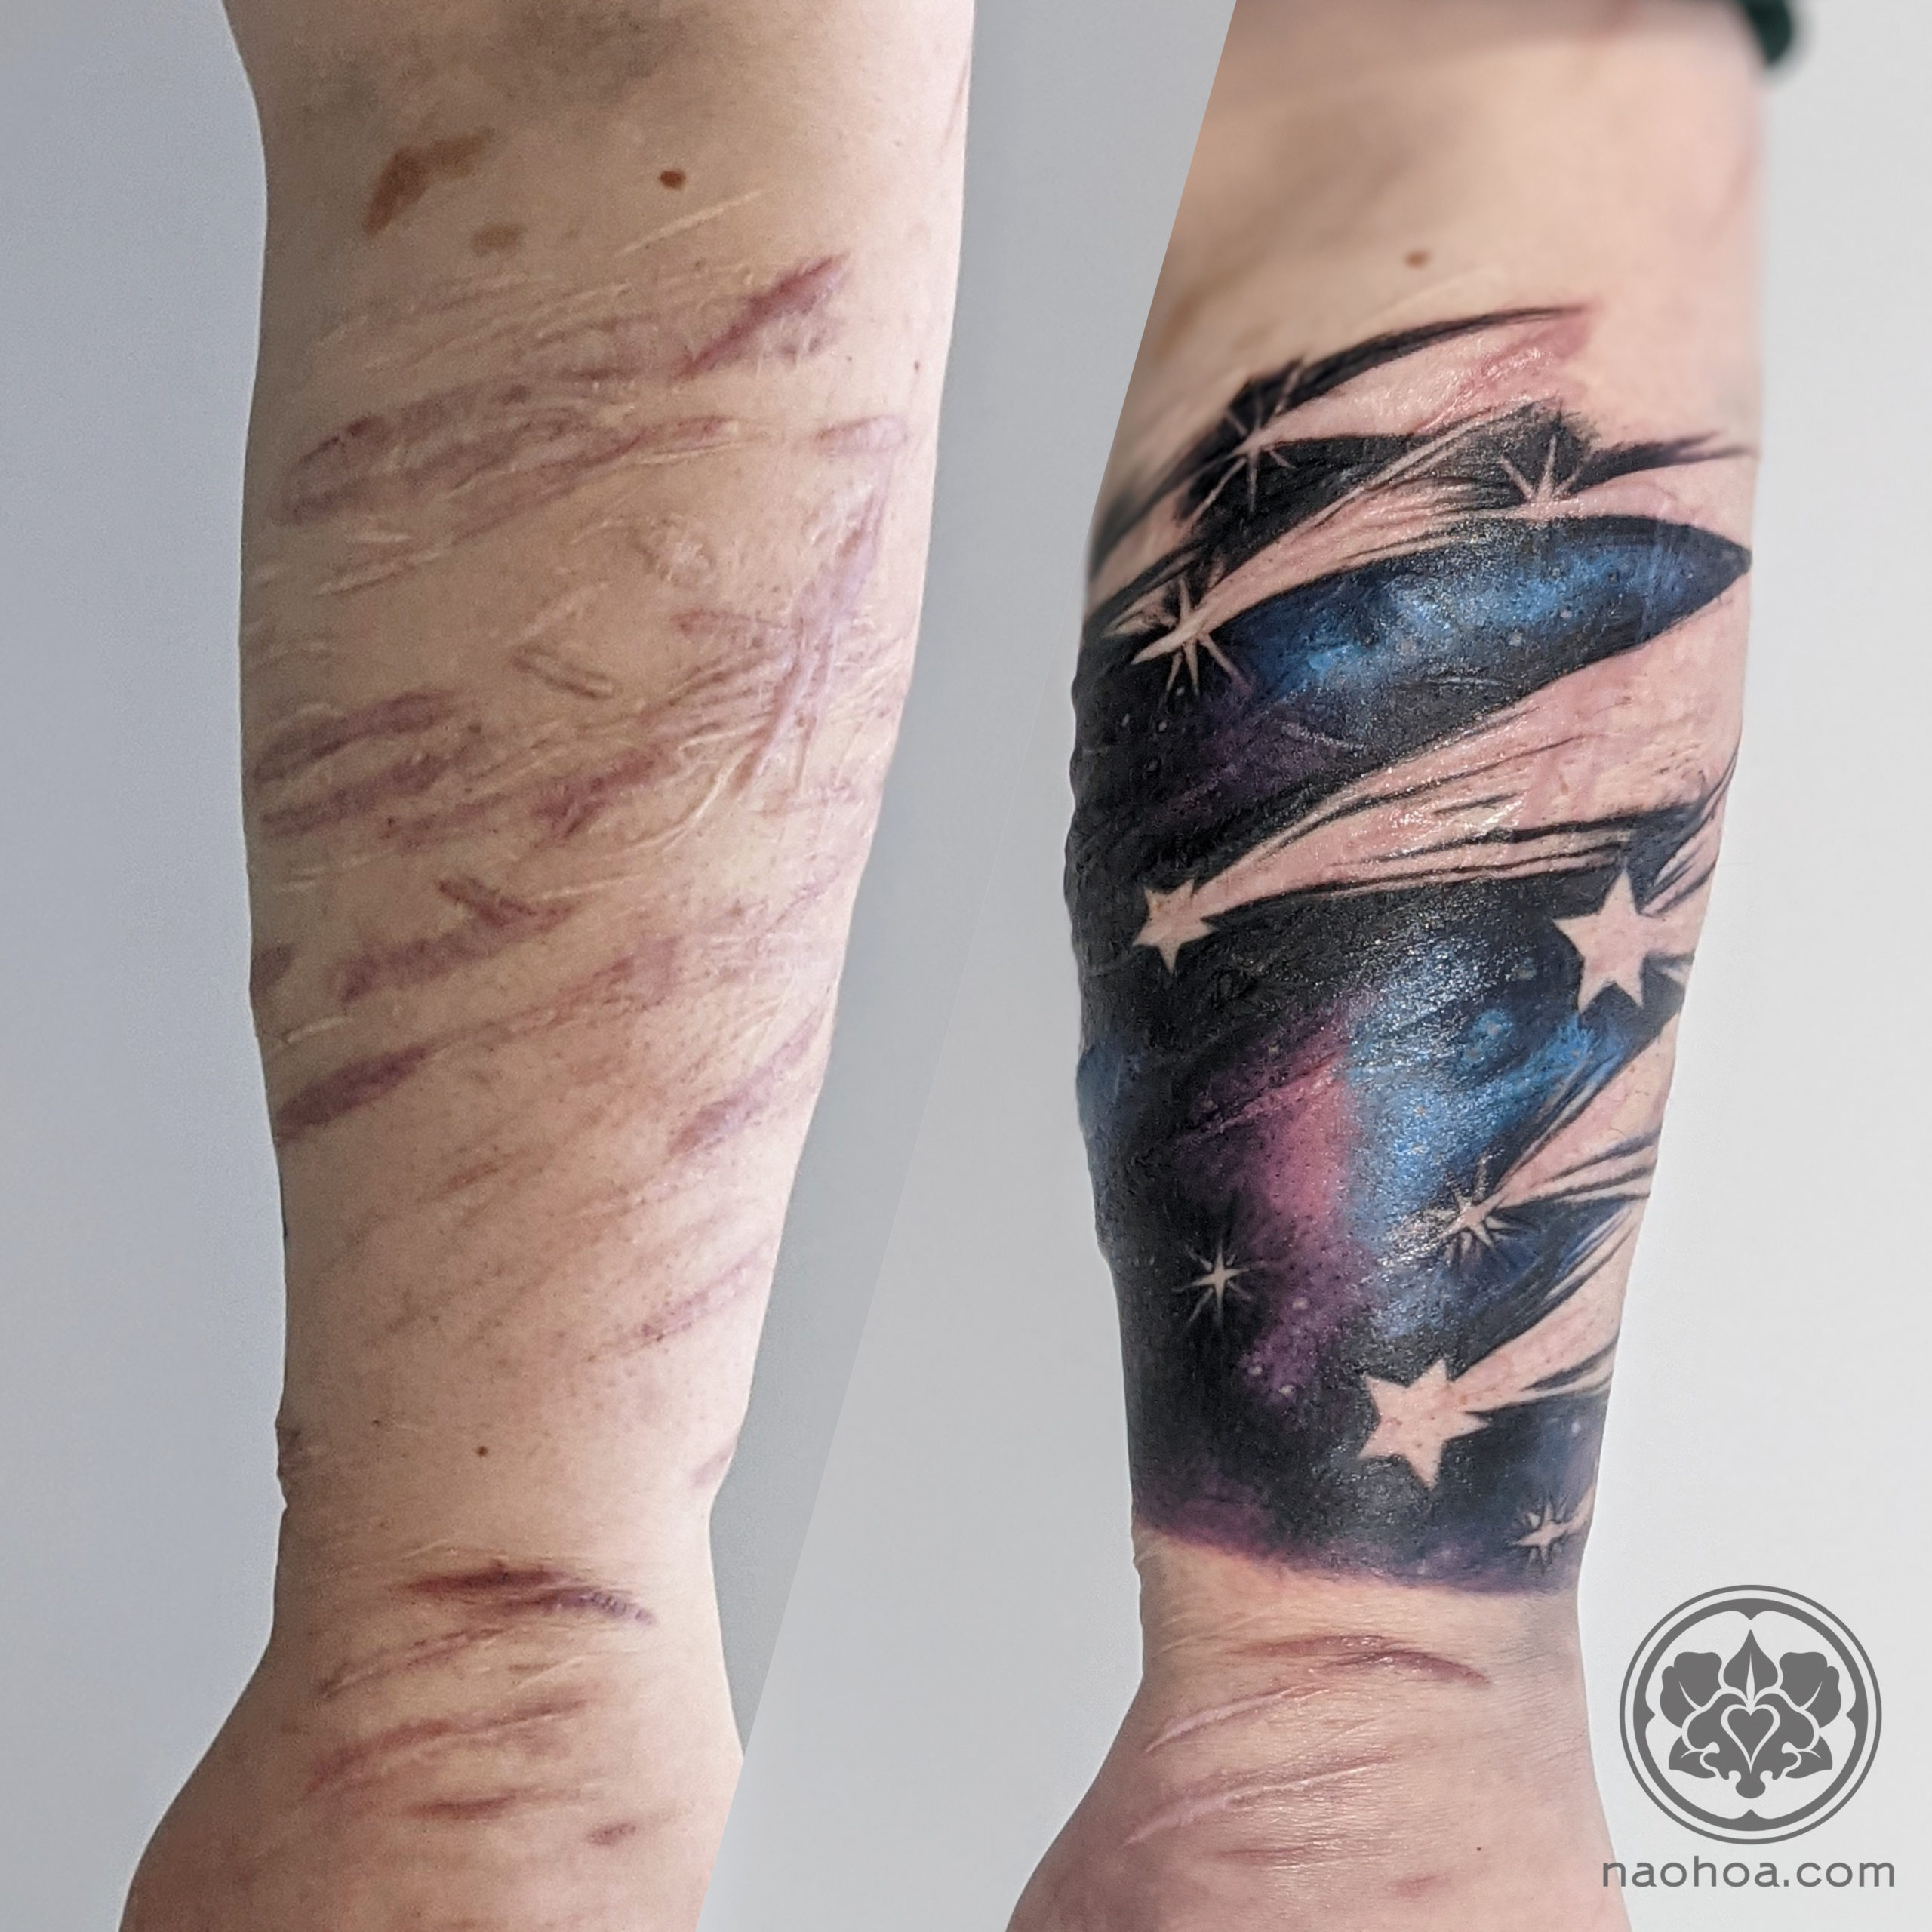 Can A Scar Be Tattooed Over? 